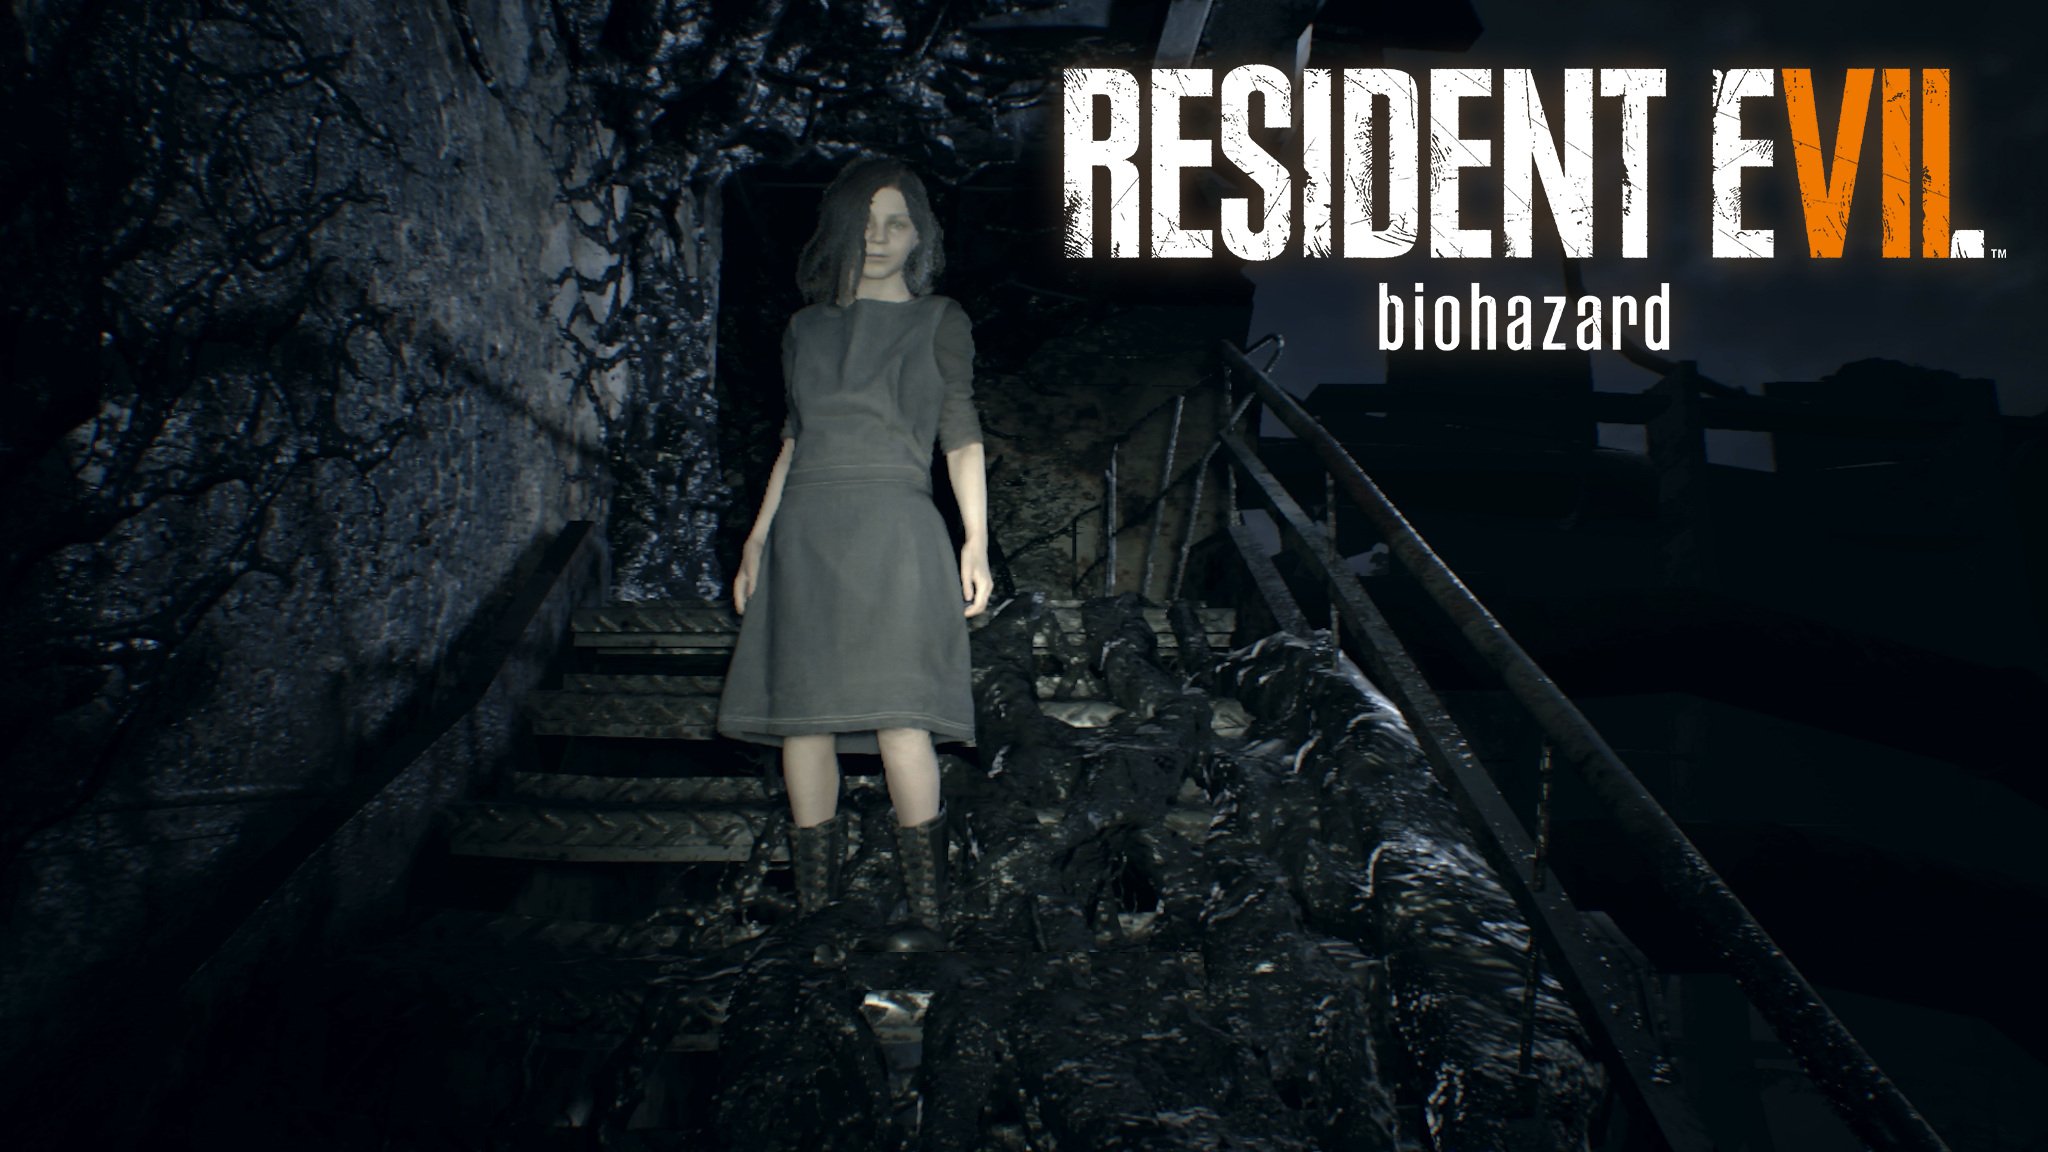 bladerdeeg Grondwet doolhof Resident Evil 7 speedrun guide: How to beat the game in under four hours |  Windows Central